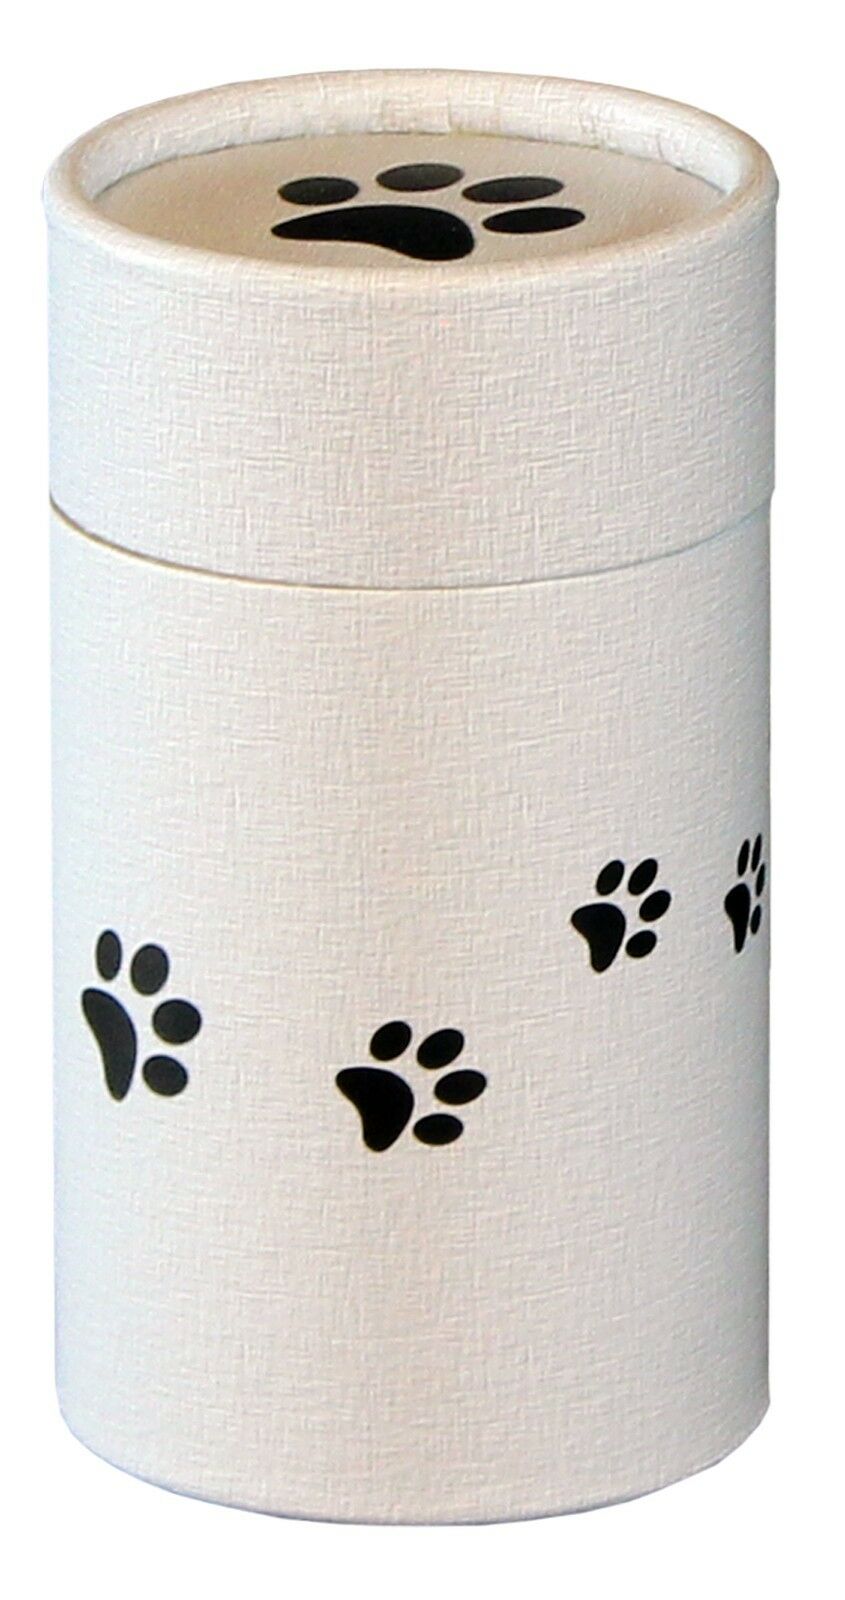 Paws Small 40 Cubic Inches Biodegradable Scattering Tube for Ashes